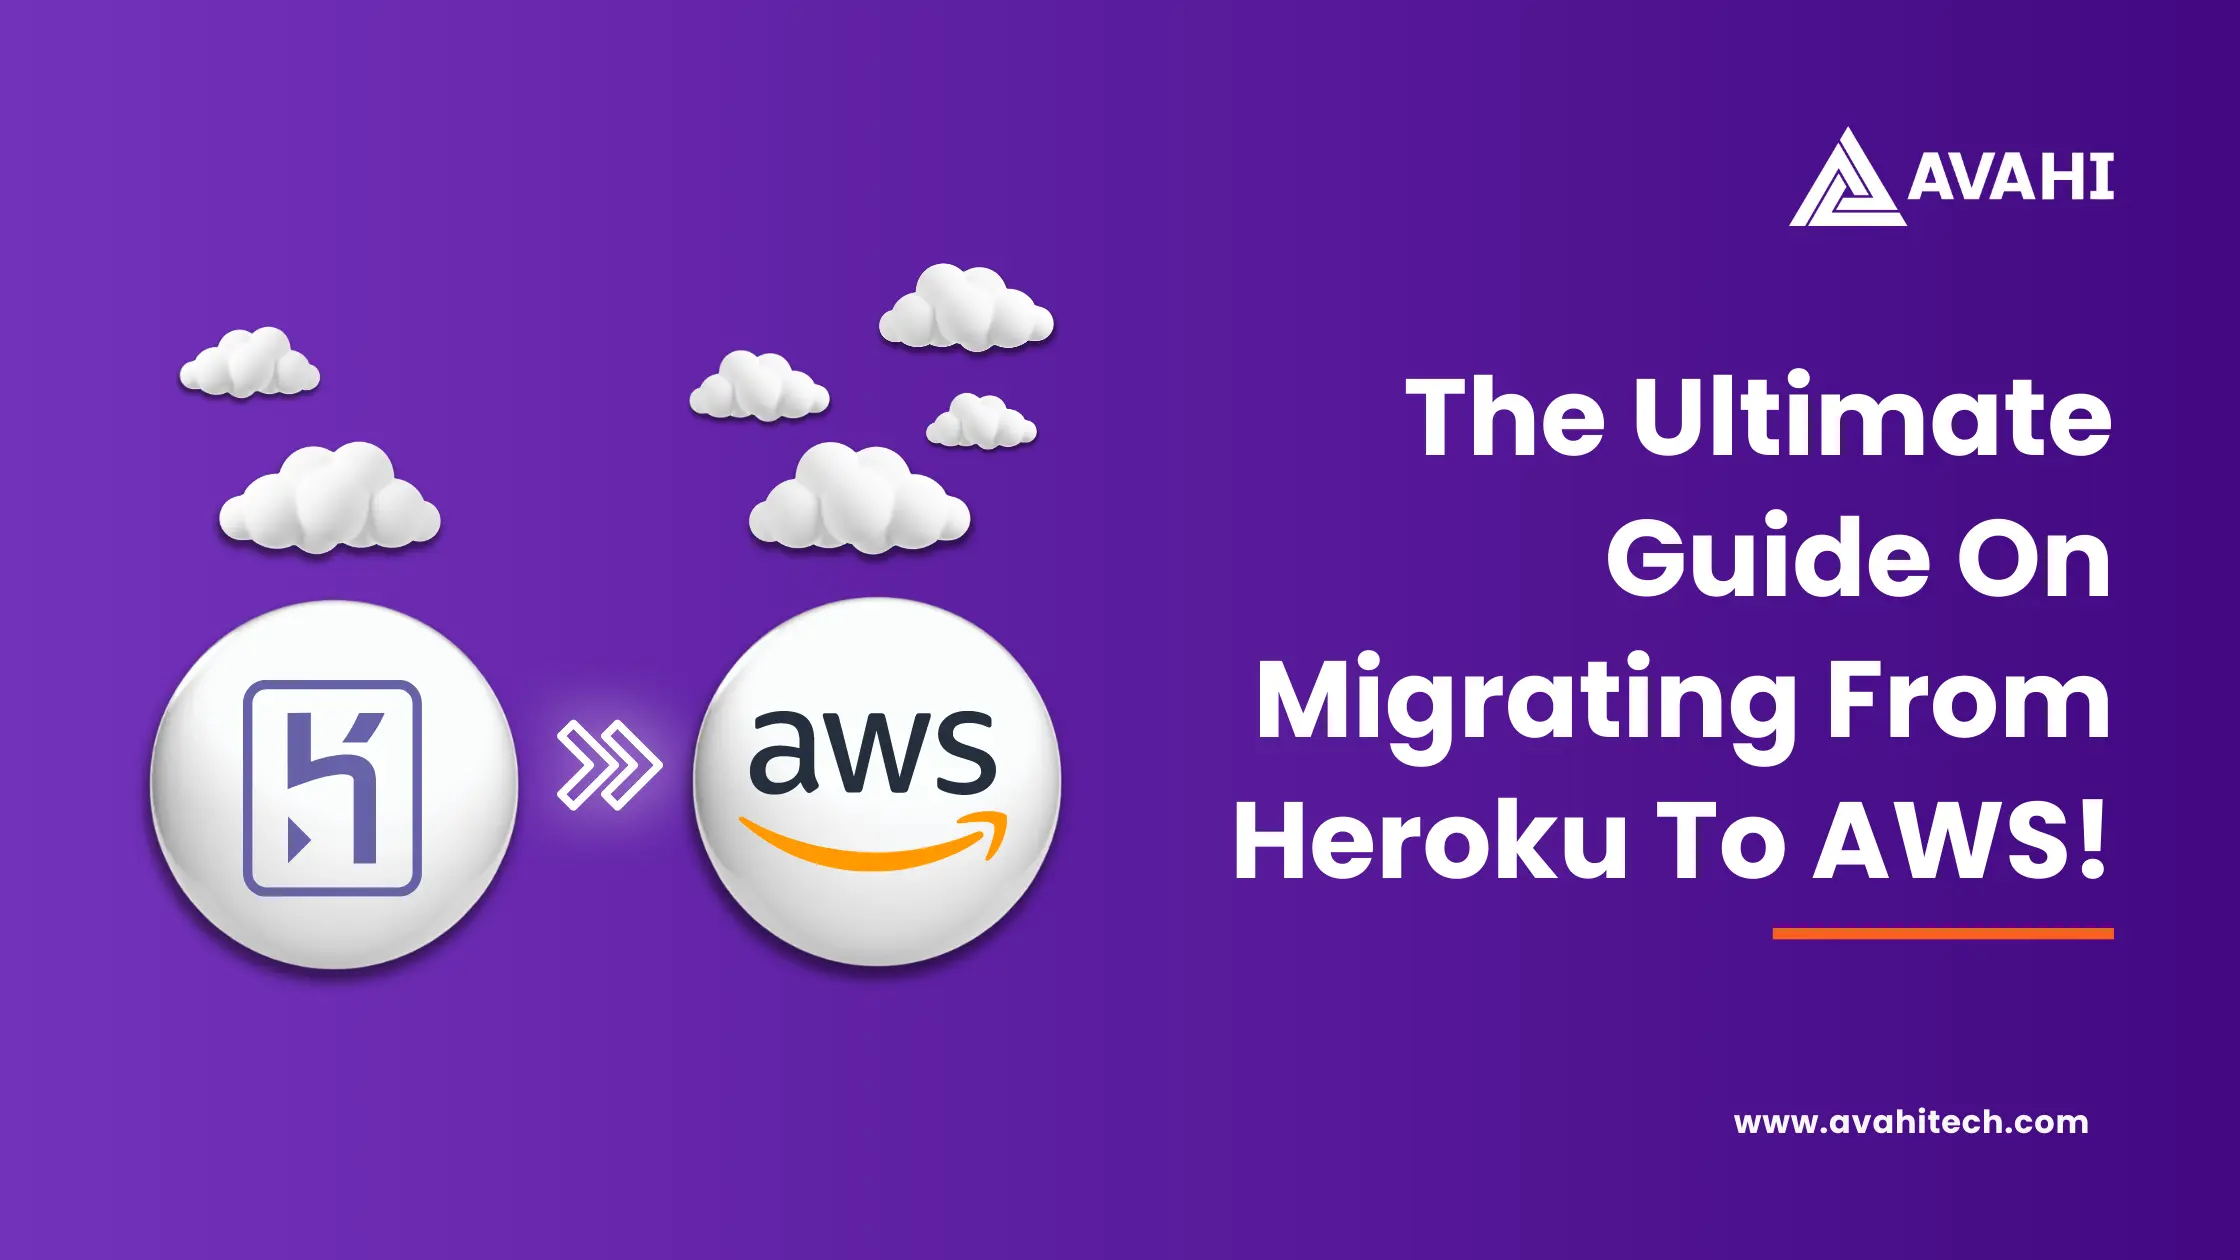 The Ultimate Guide On Migrating From Heroku To AWS!